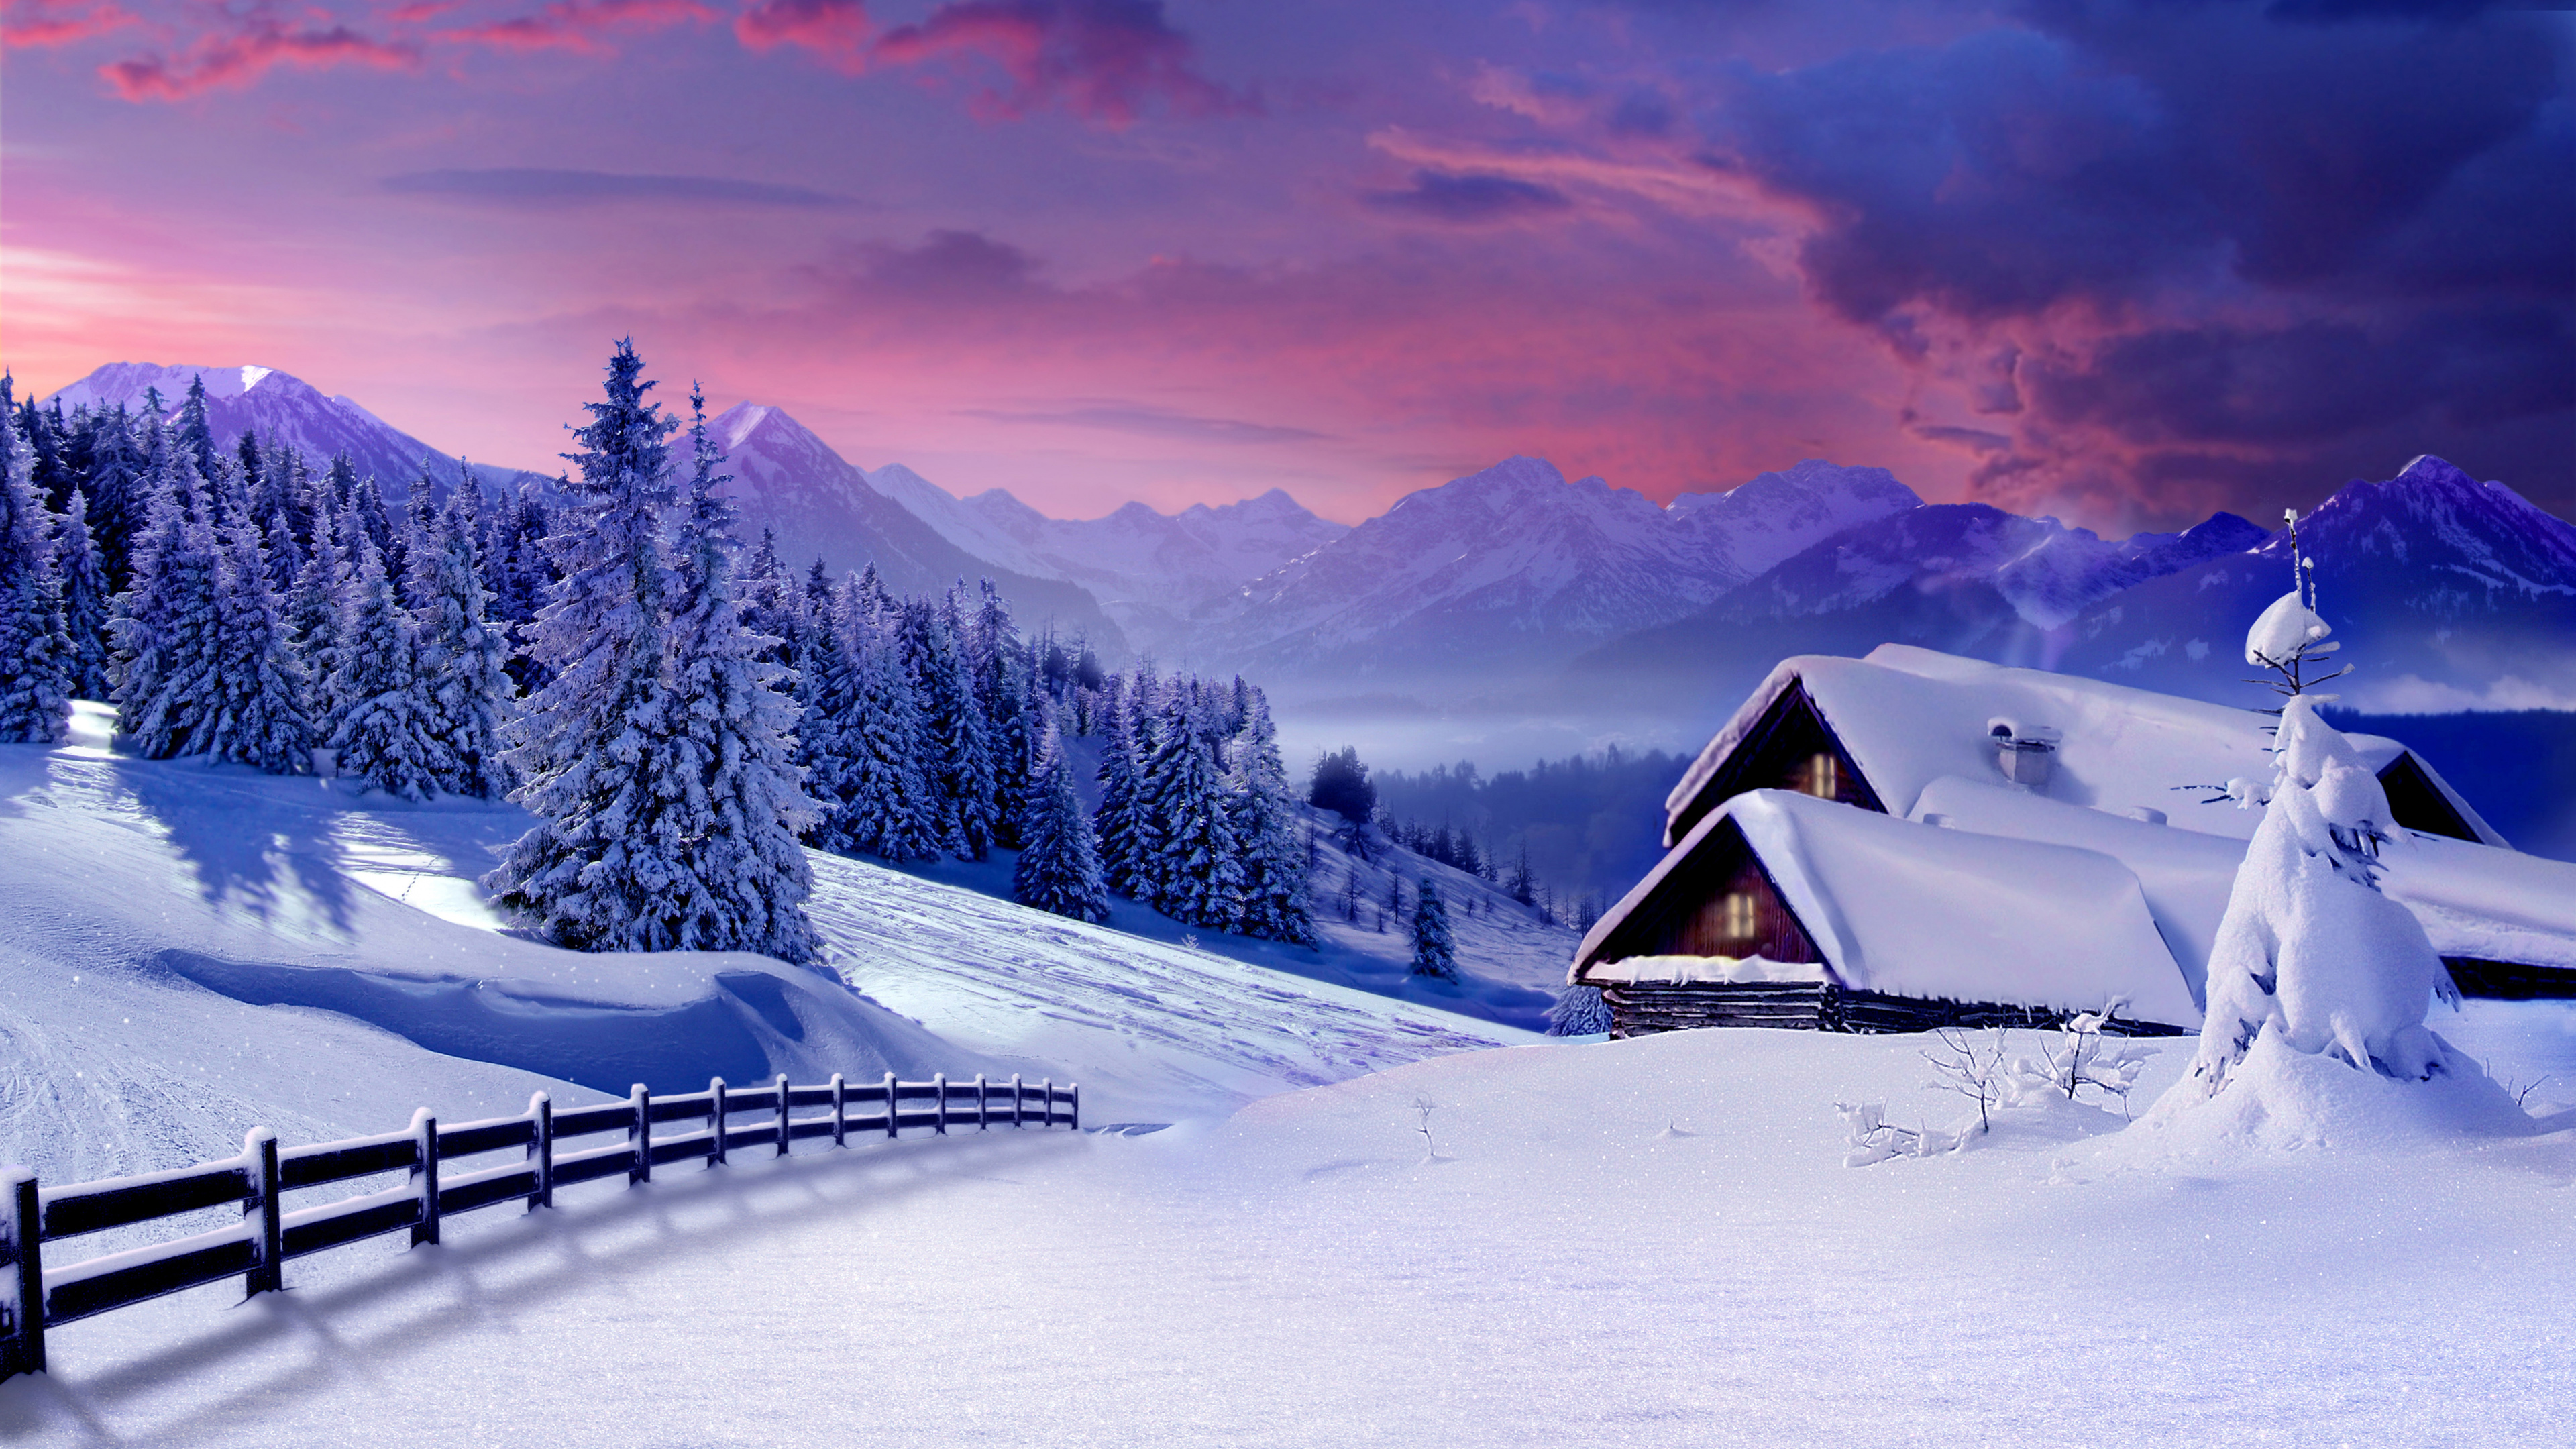 Brown Wooden House on Snow Covered Ground Near Trees and Mountains During Daytime. Wallpaper in 3840x2160 Resolution